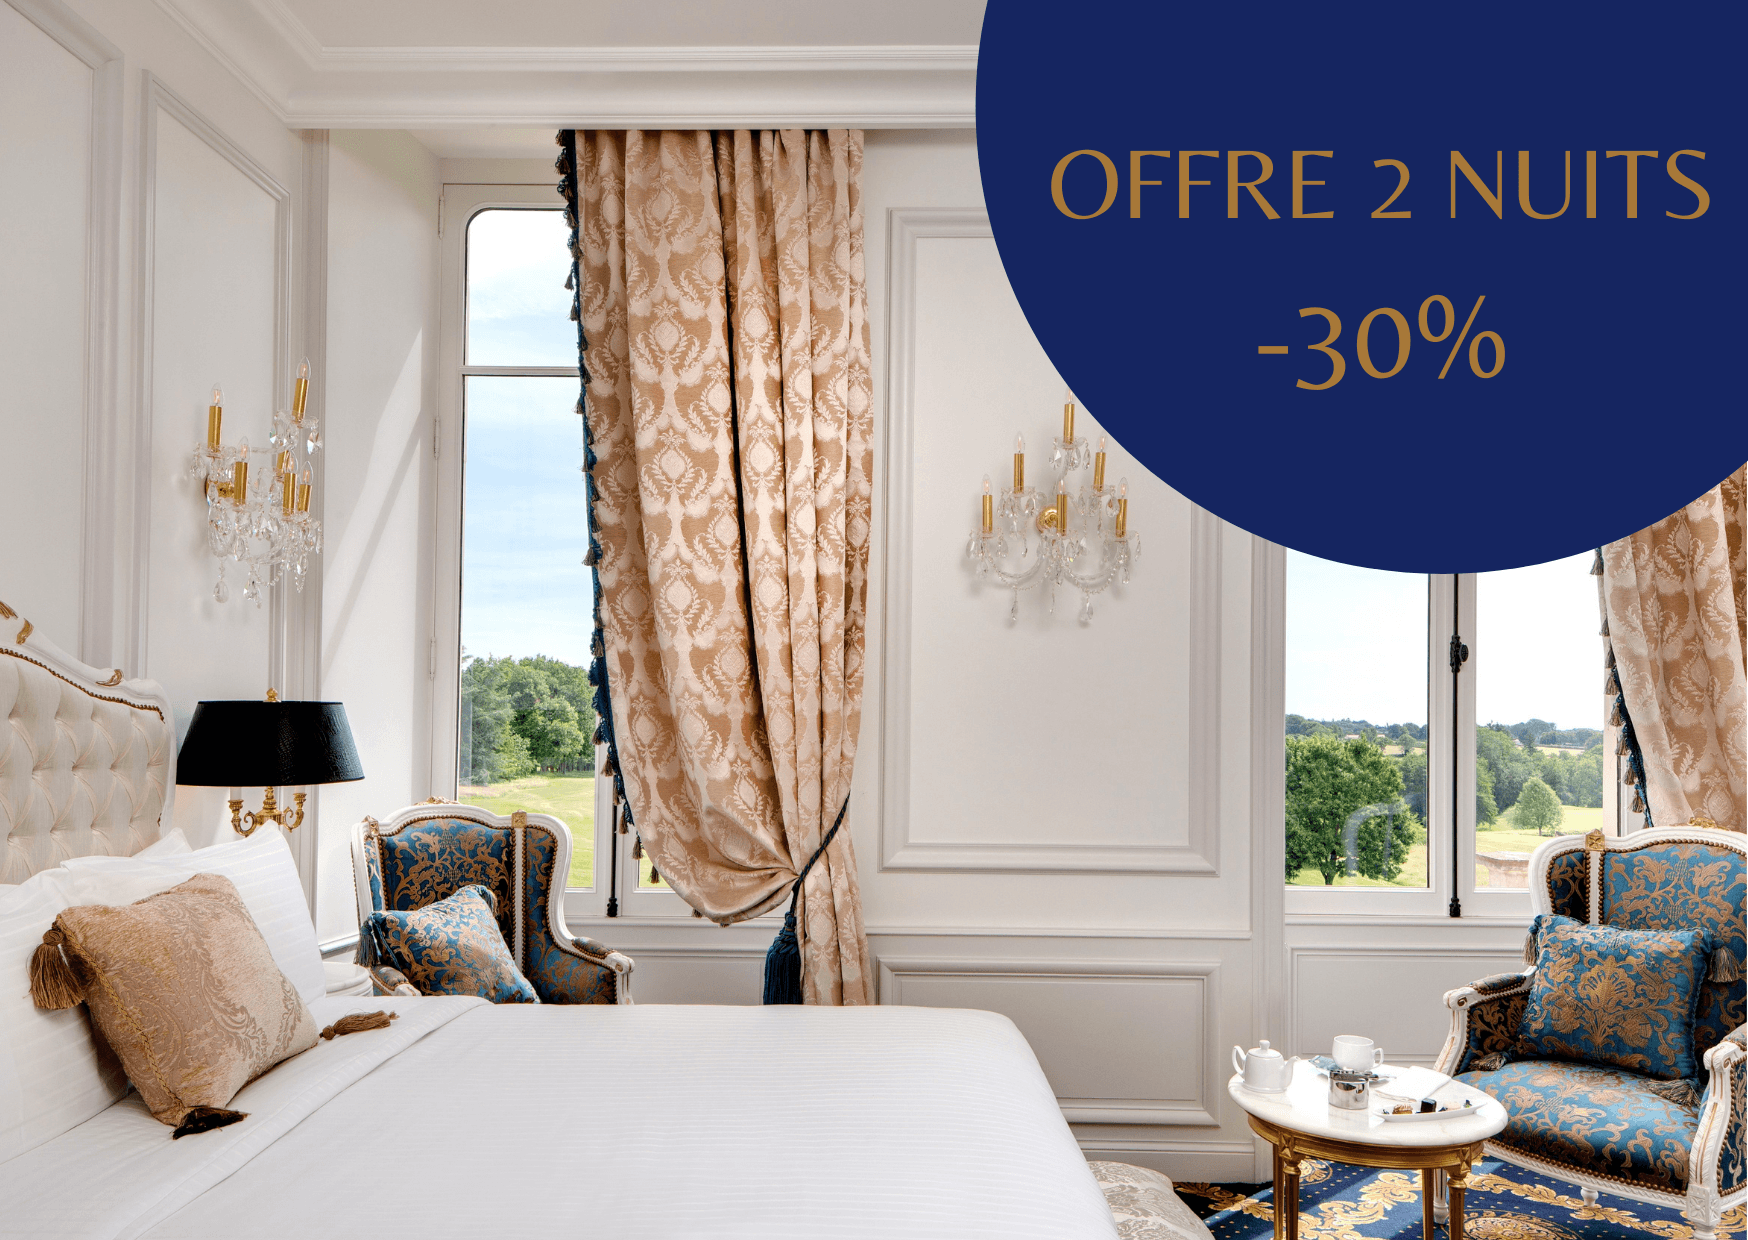 special two nights offer - France Stay - Marais Poitevin -  Alexandra Palace hotel***** - 20 min from Niort